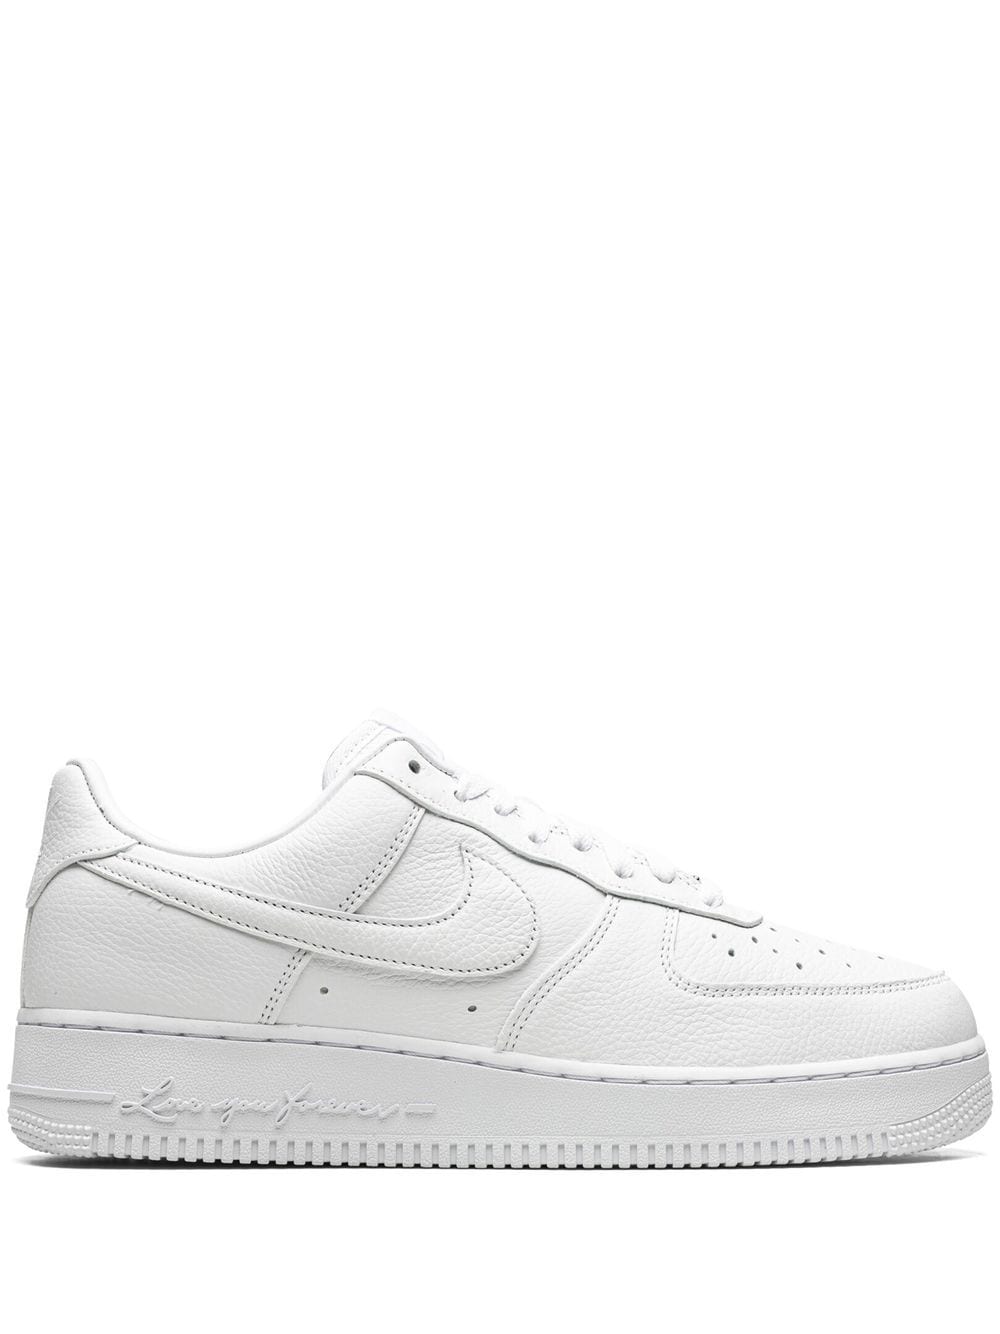 Nike x x Drake NOCTA Air Force 1 Low "Certified Lover Boy (Love You Forever Edition)" sneakers - White von Nike